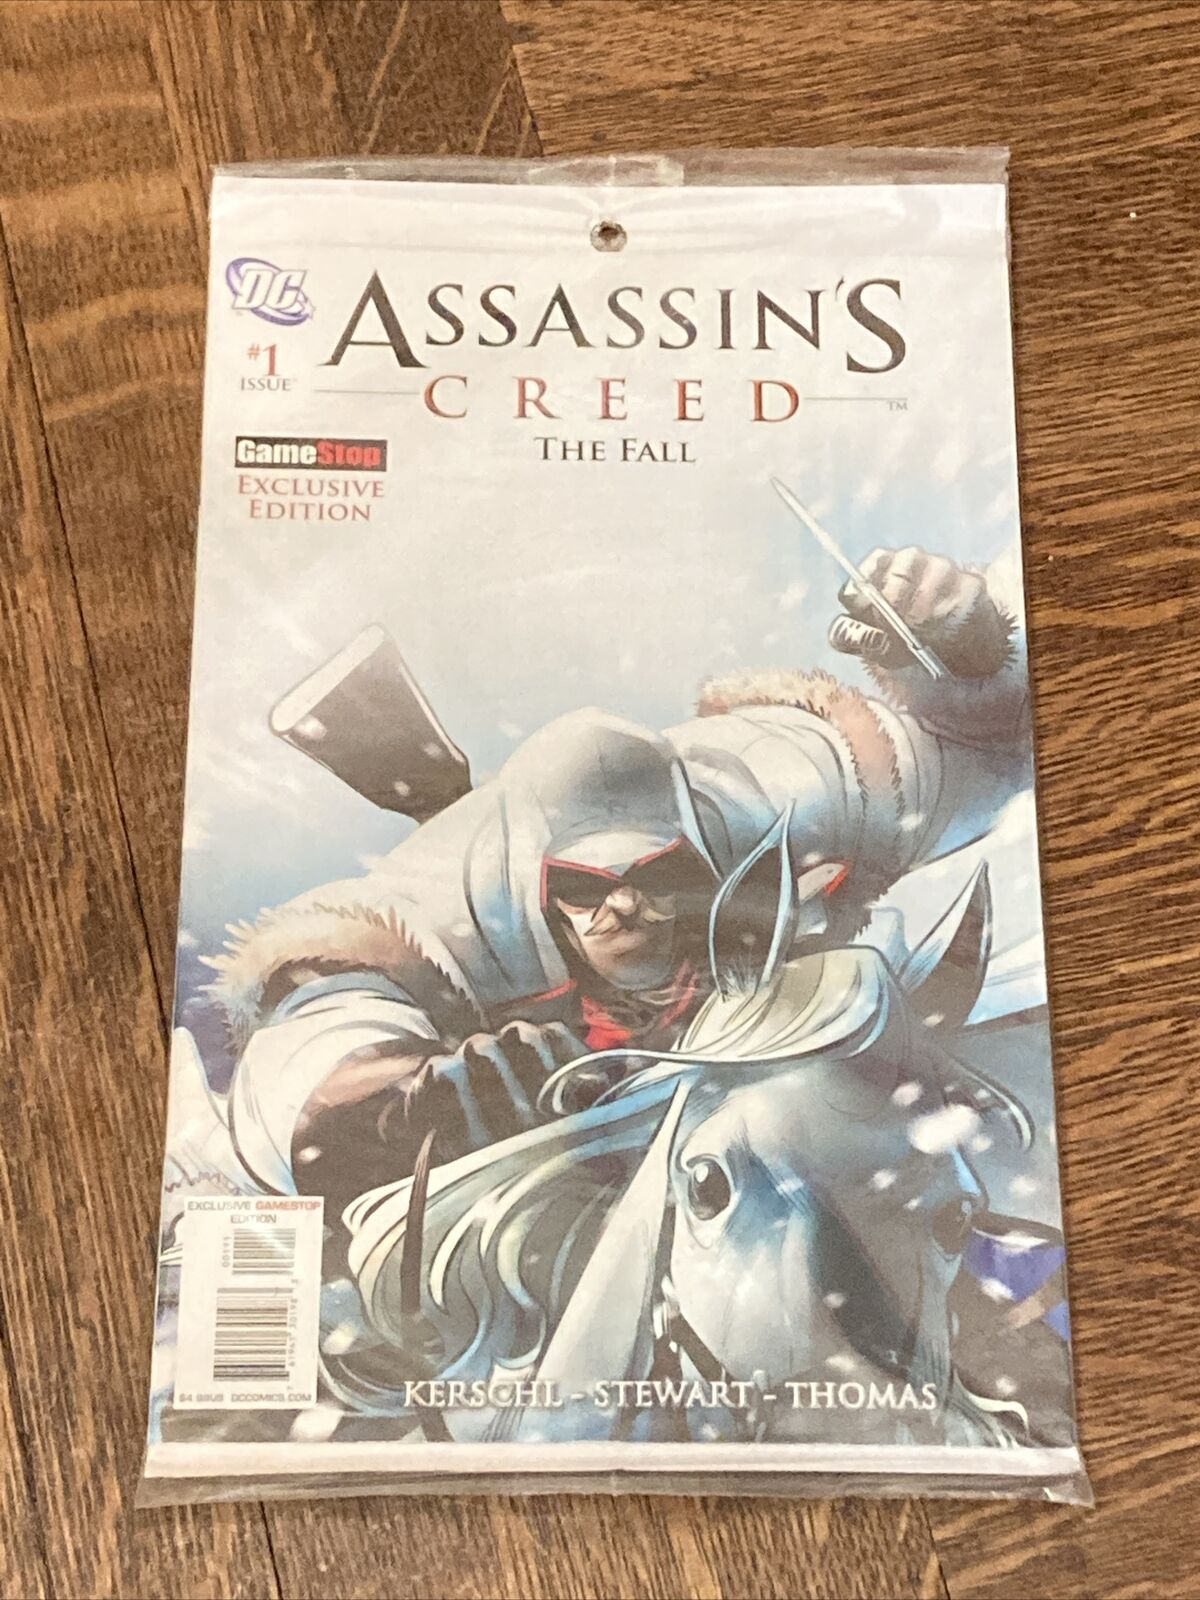 ASSASSIN\'S CREED #1 THE FALL GAMESTOP EXCLUSIVE EDITION SEALED.